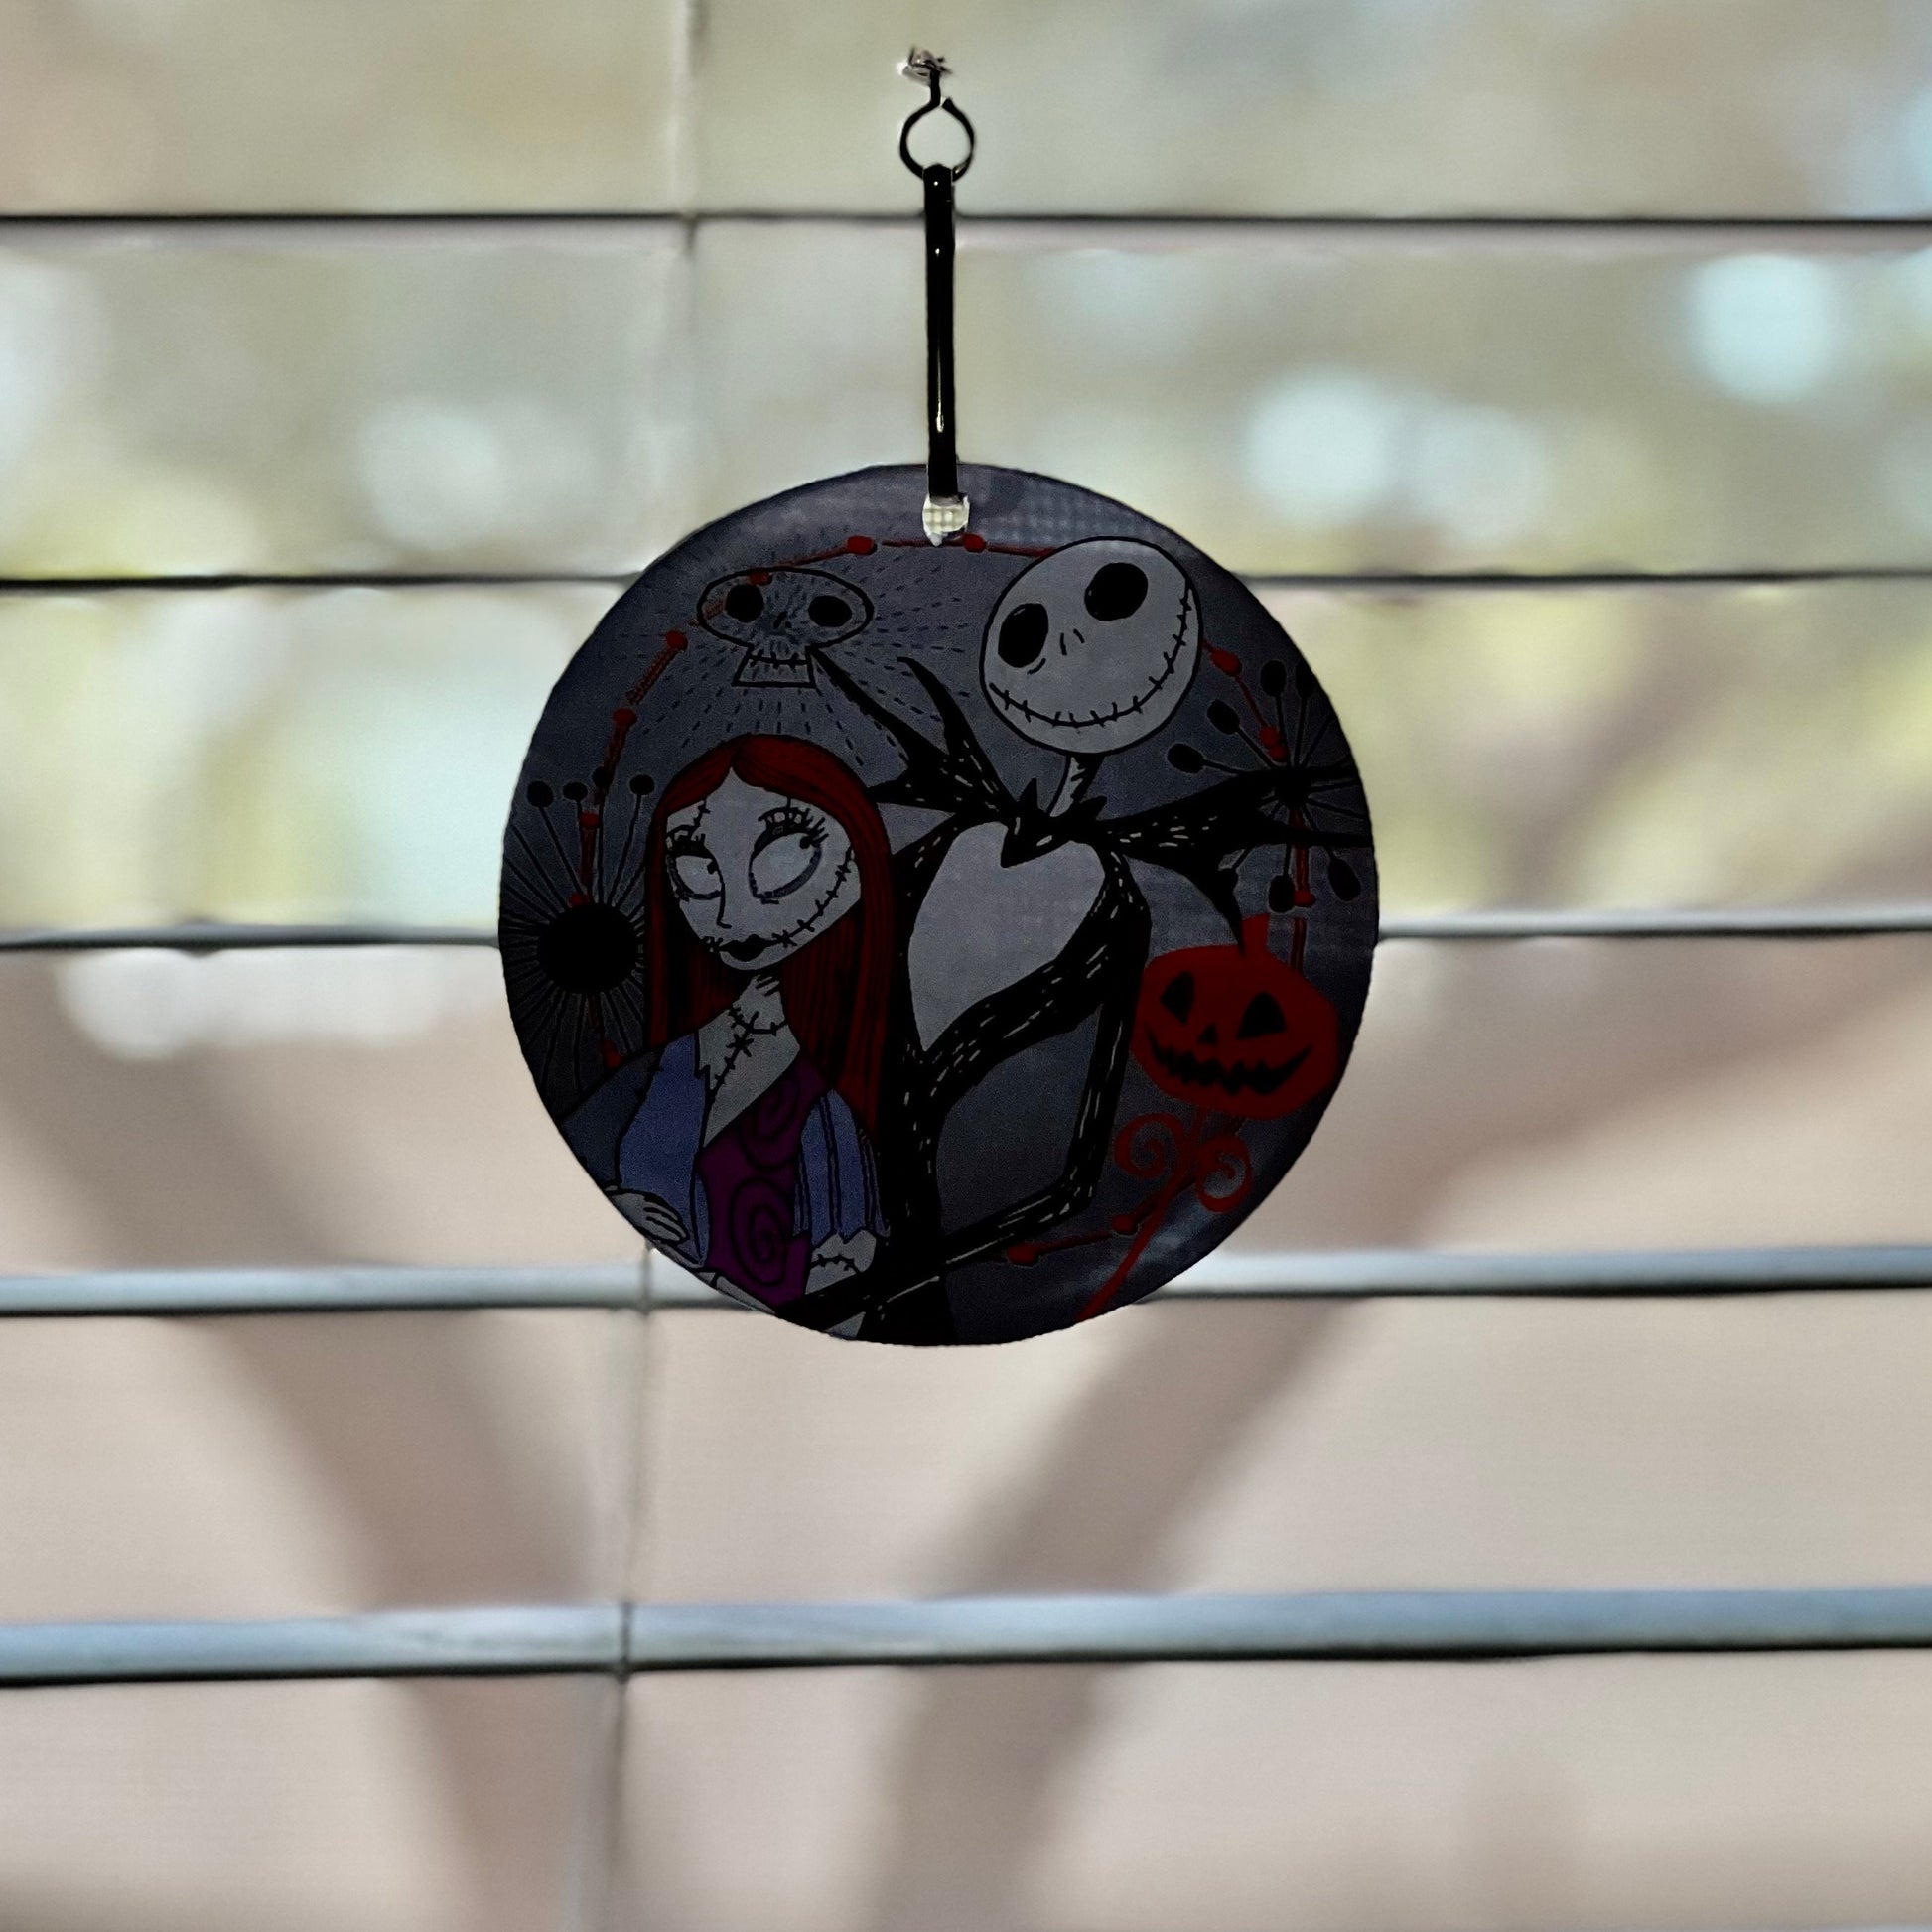 Jack and Sally Nightmare before Christmas 4” Holiday ornament